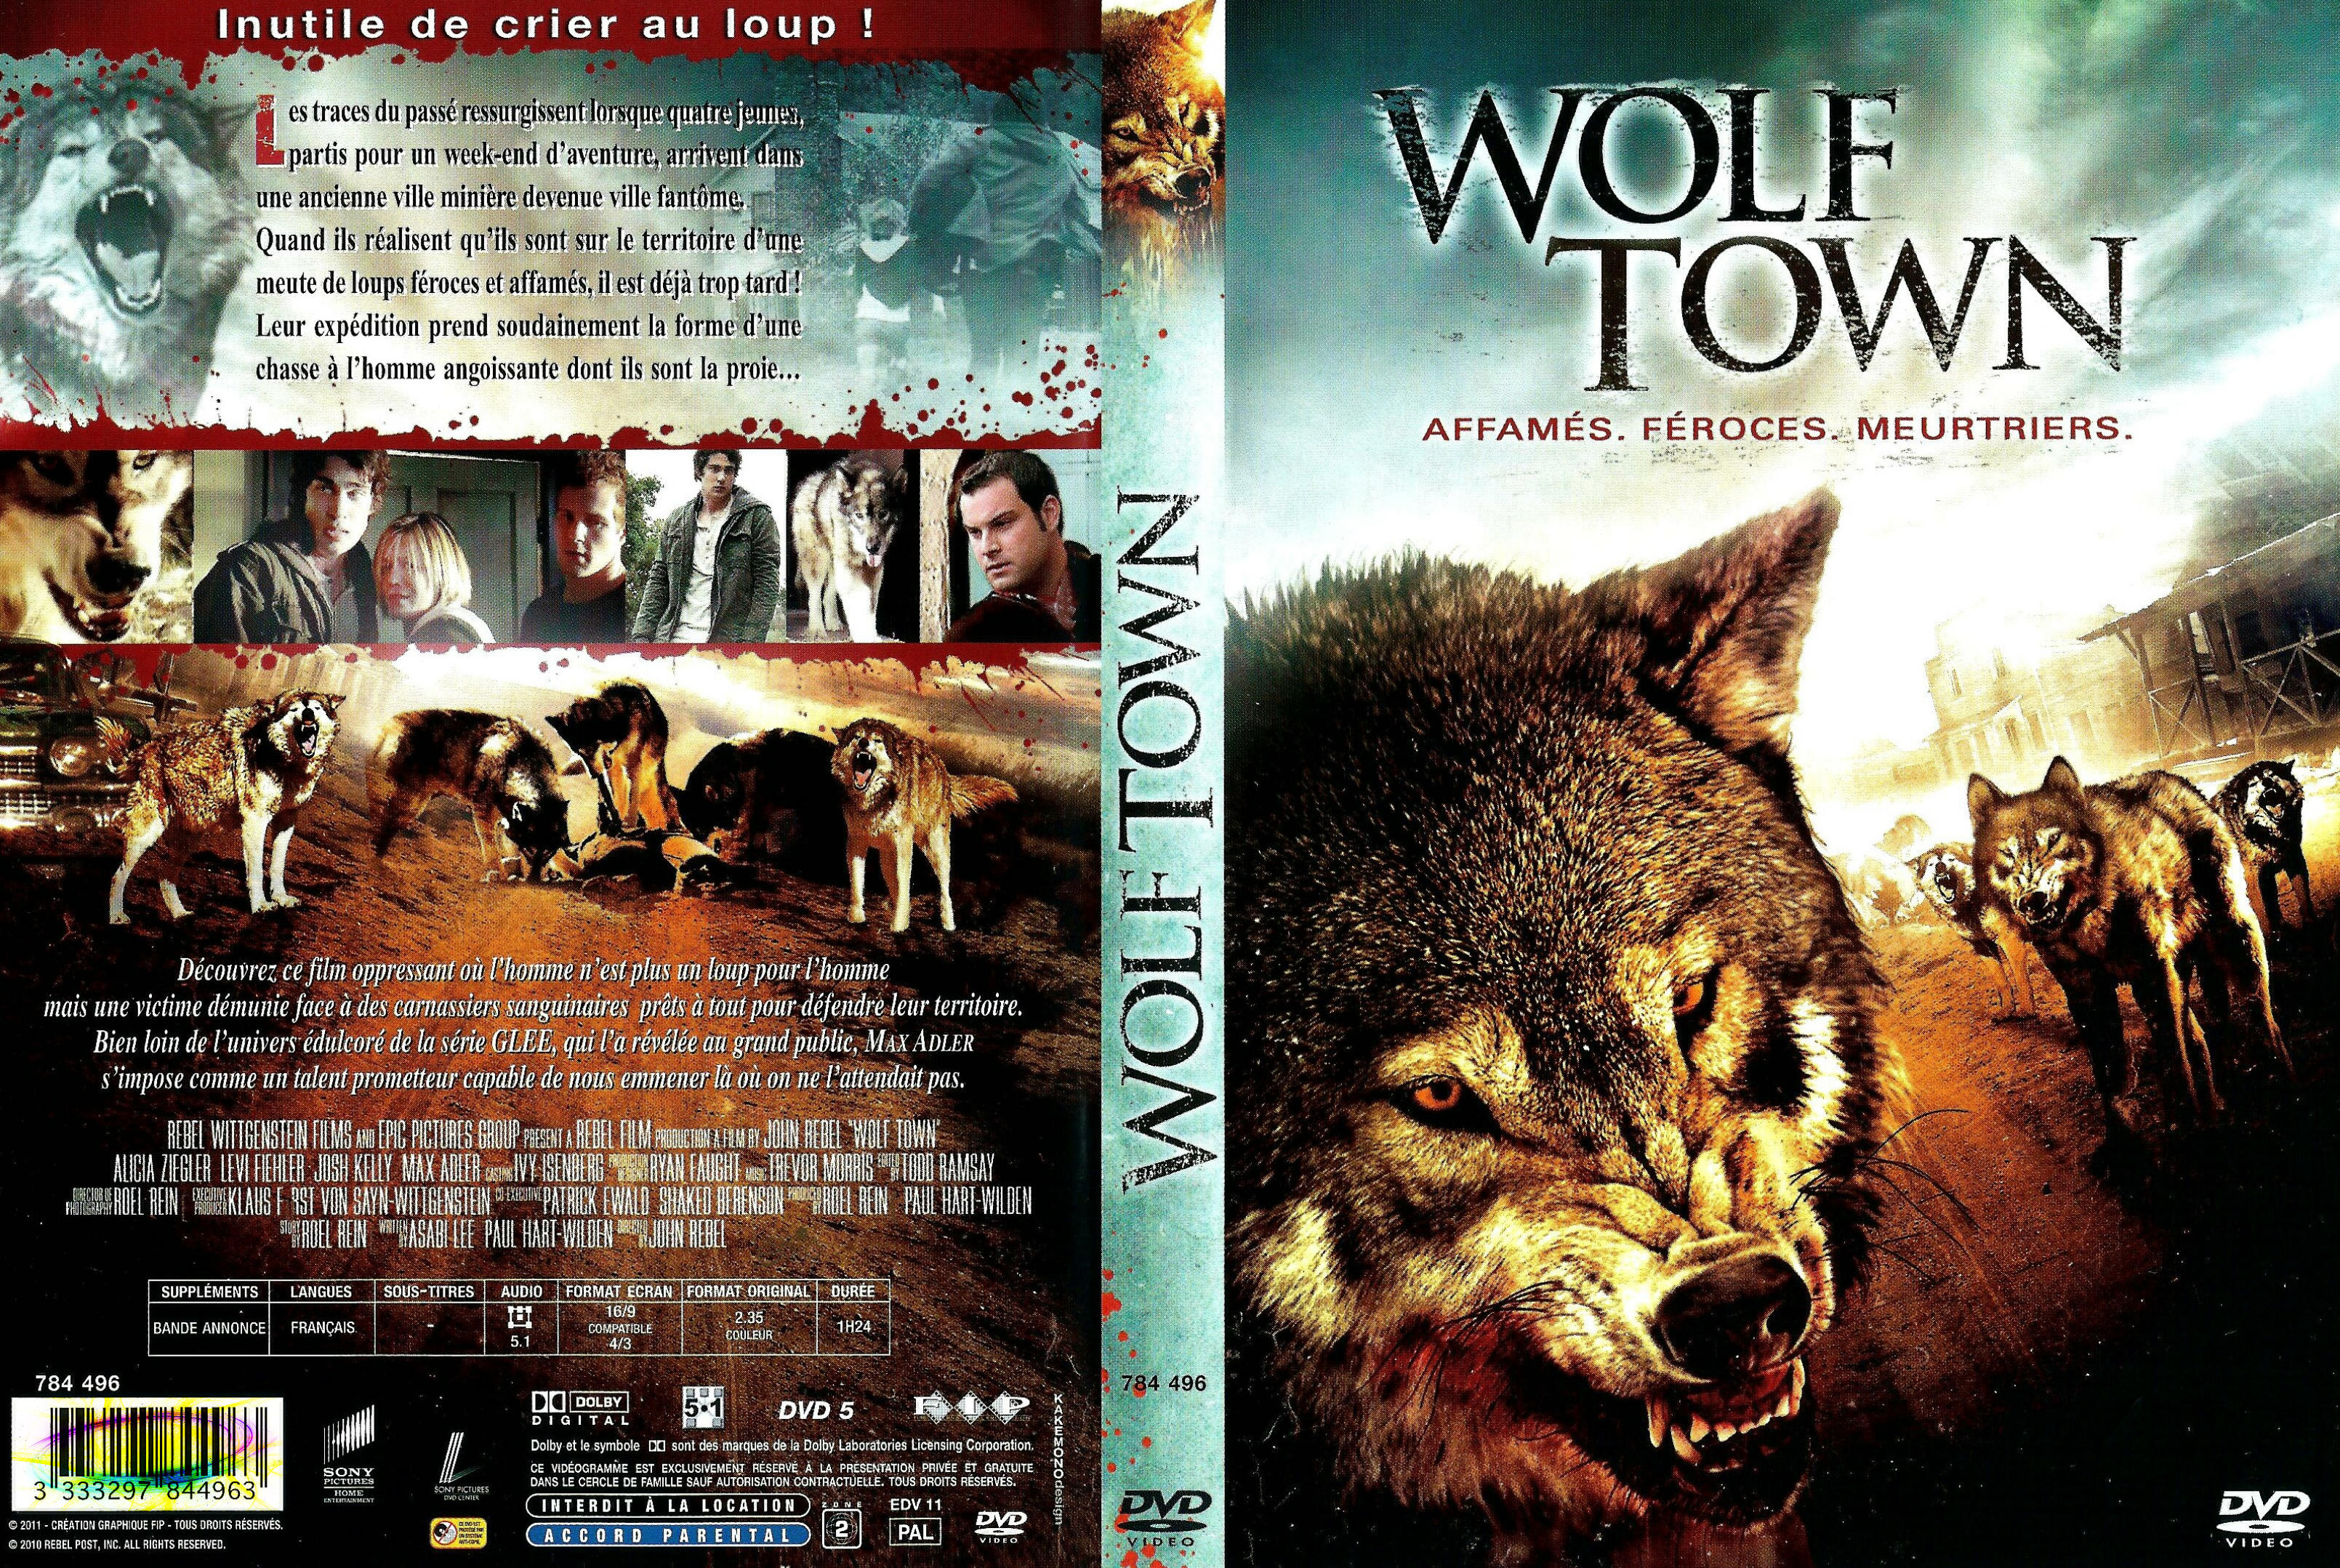 Jaquette DVD Wolf town